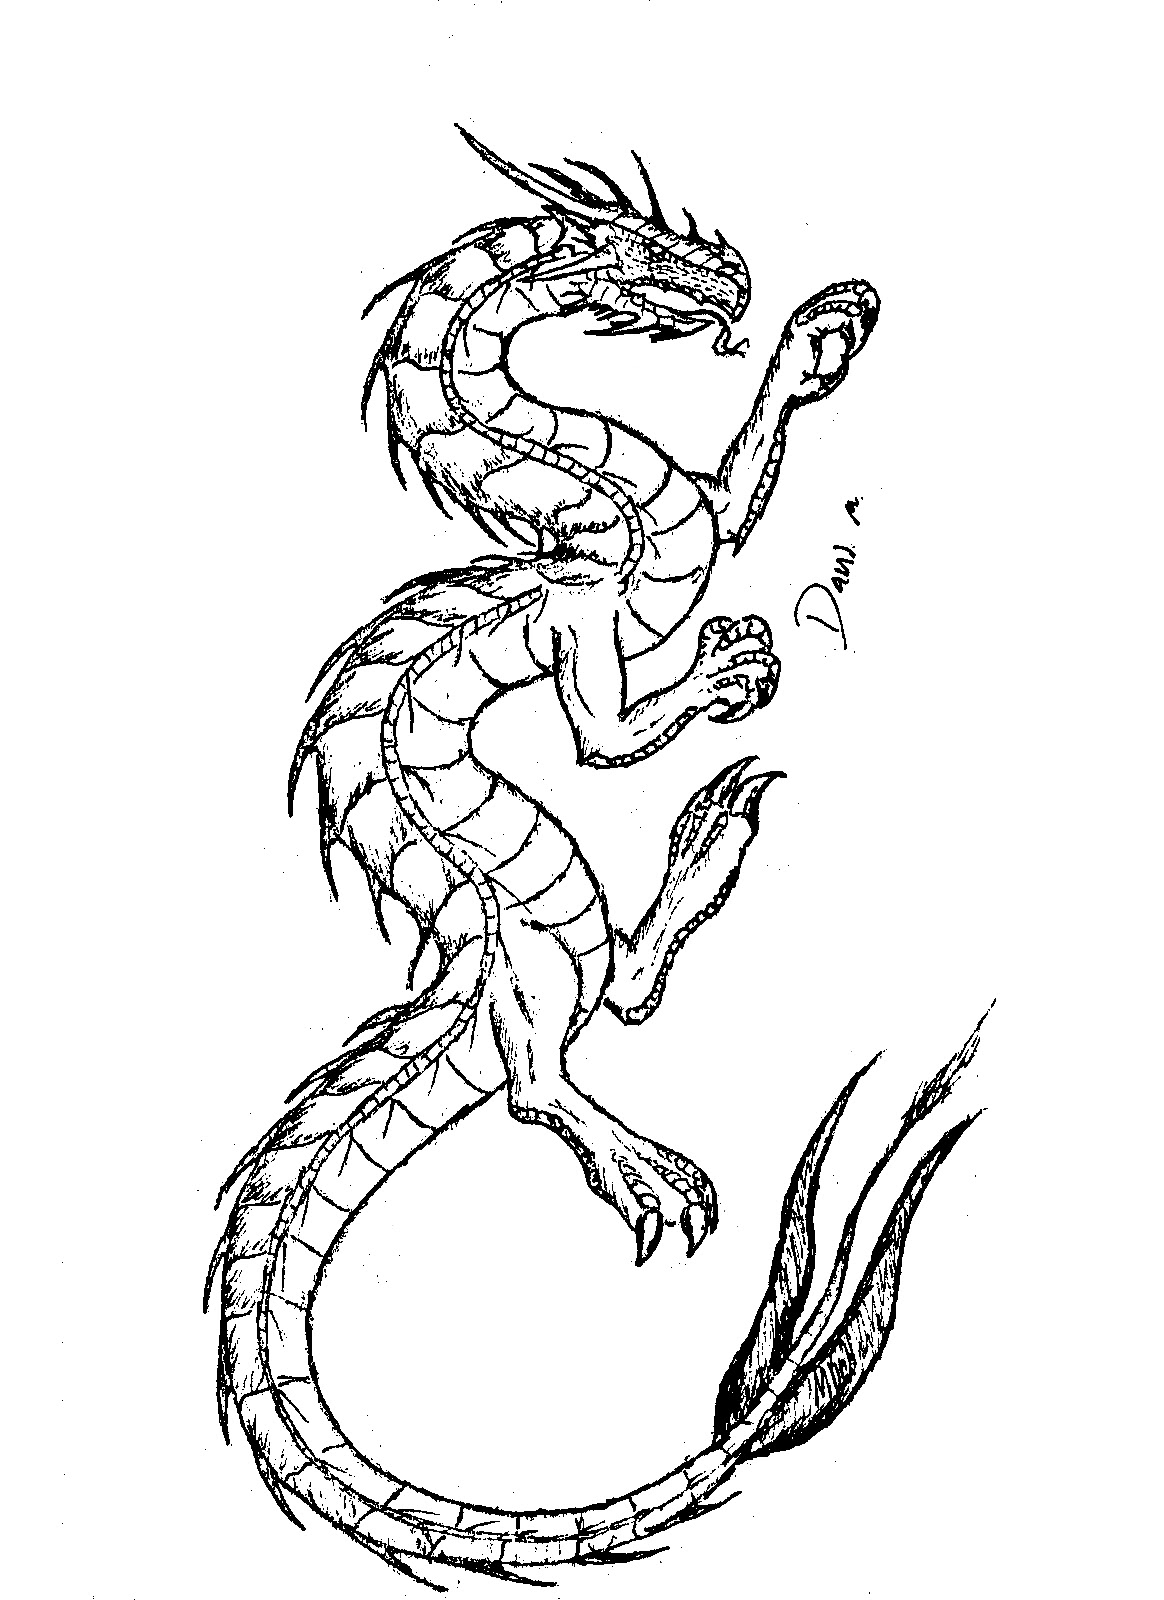 Coloring Page World: Tattoo Dragon (Portrait)